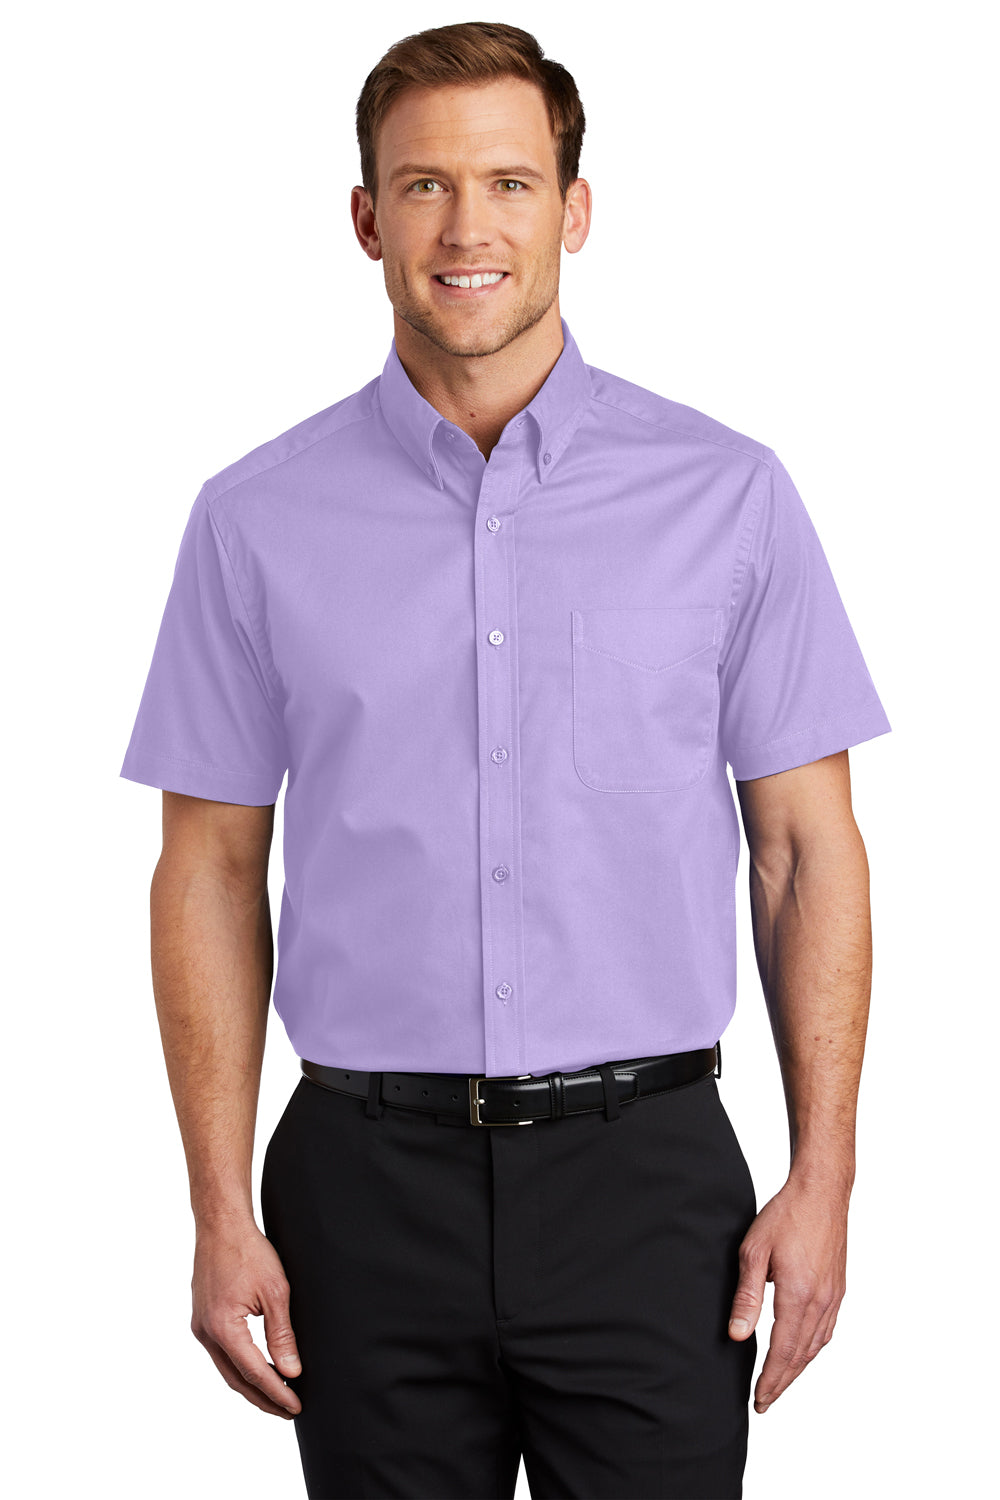 Port Authority S508/TLS508 Mens Easy Care Wrinkle Resistant Short Sleeve Button Down Shirt w/ Pocket Bright Lavender Purple Front